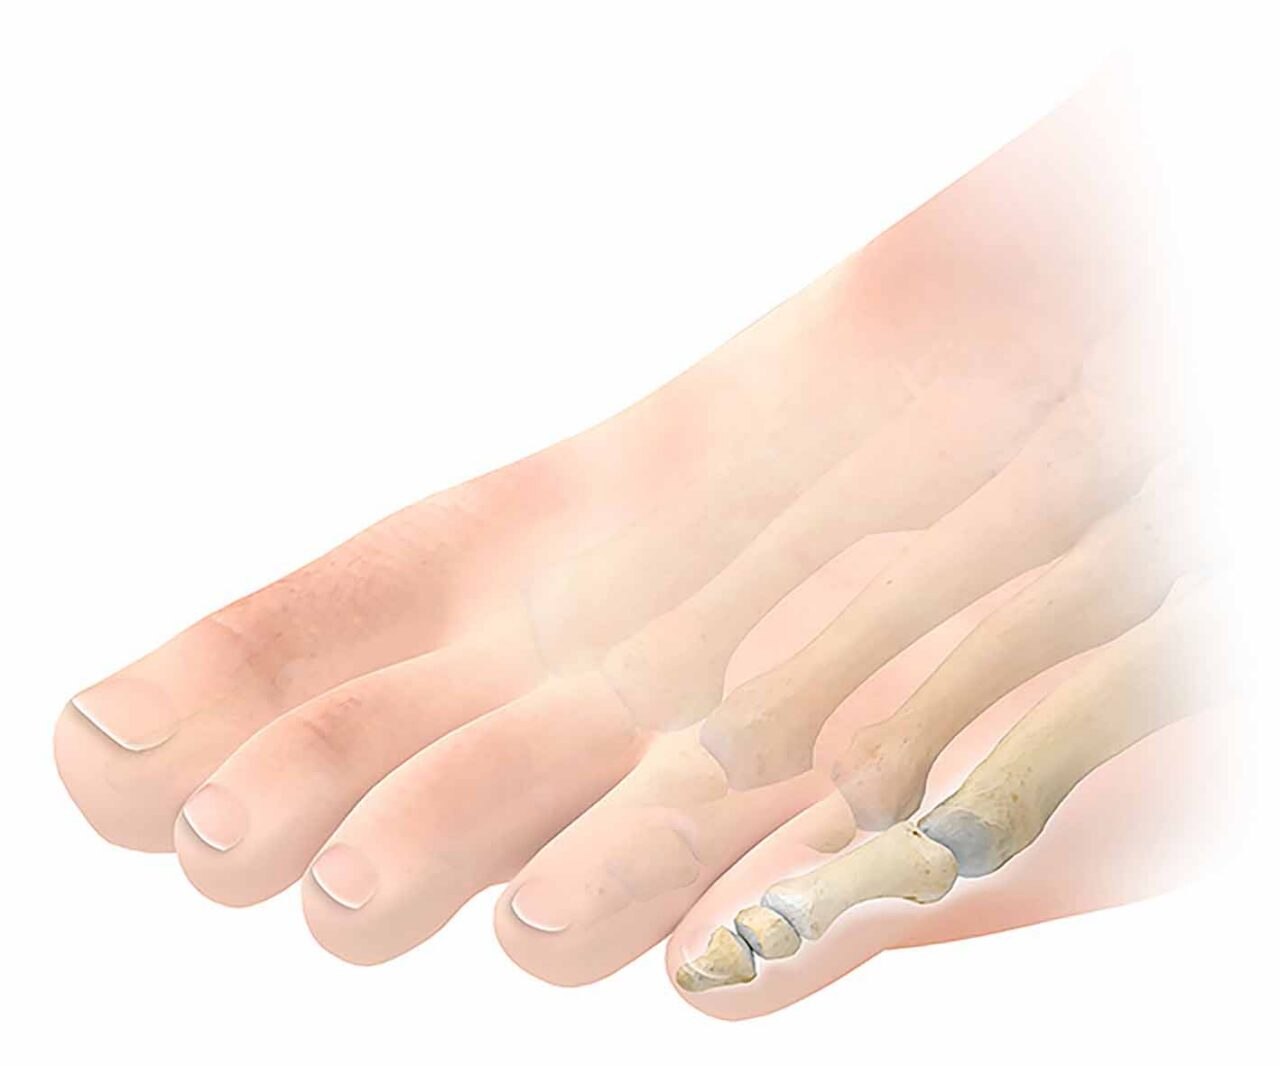 Toes-lateral-healthy